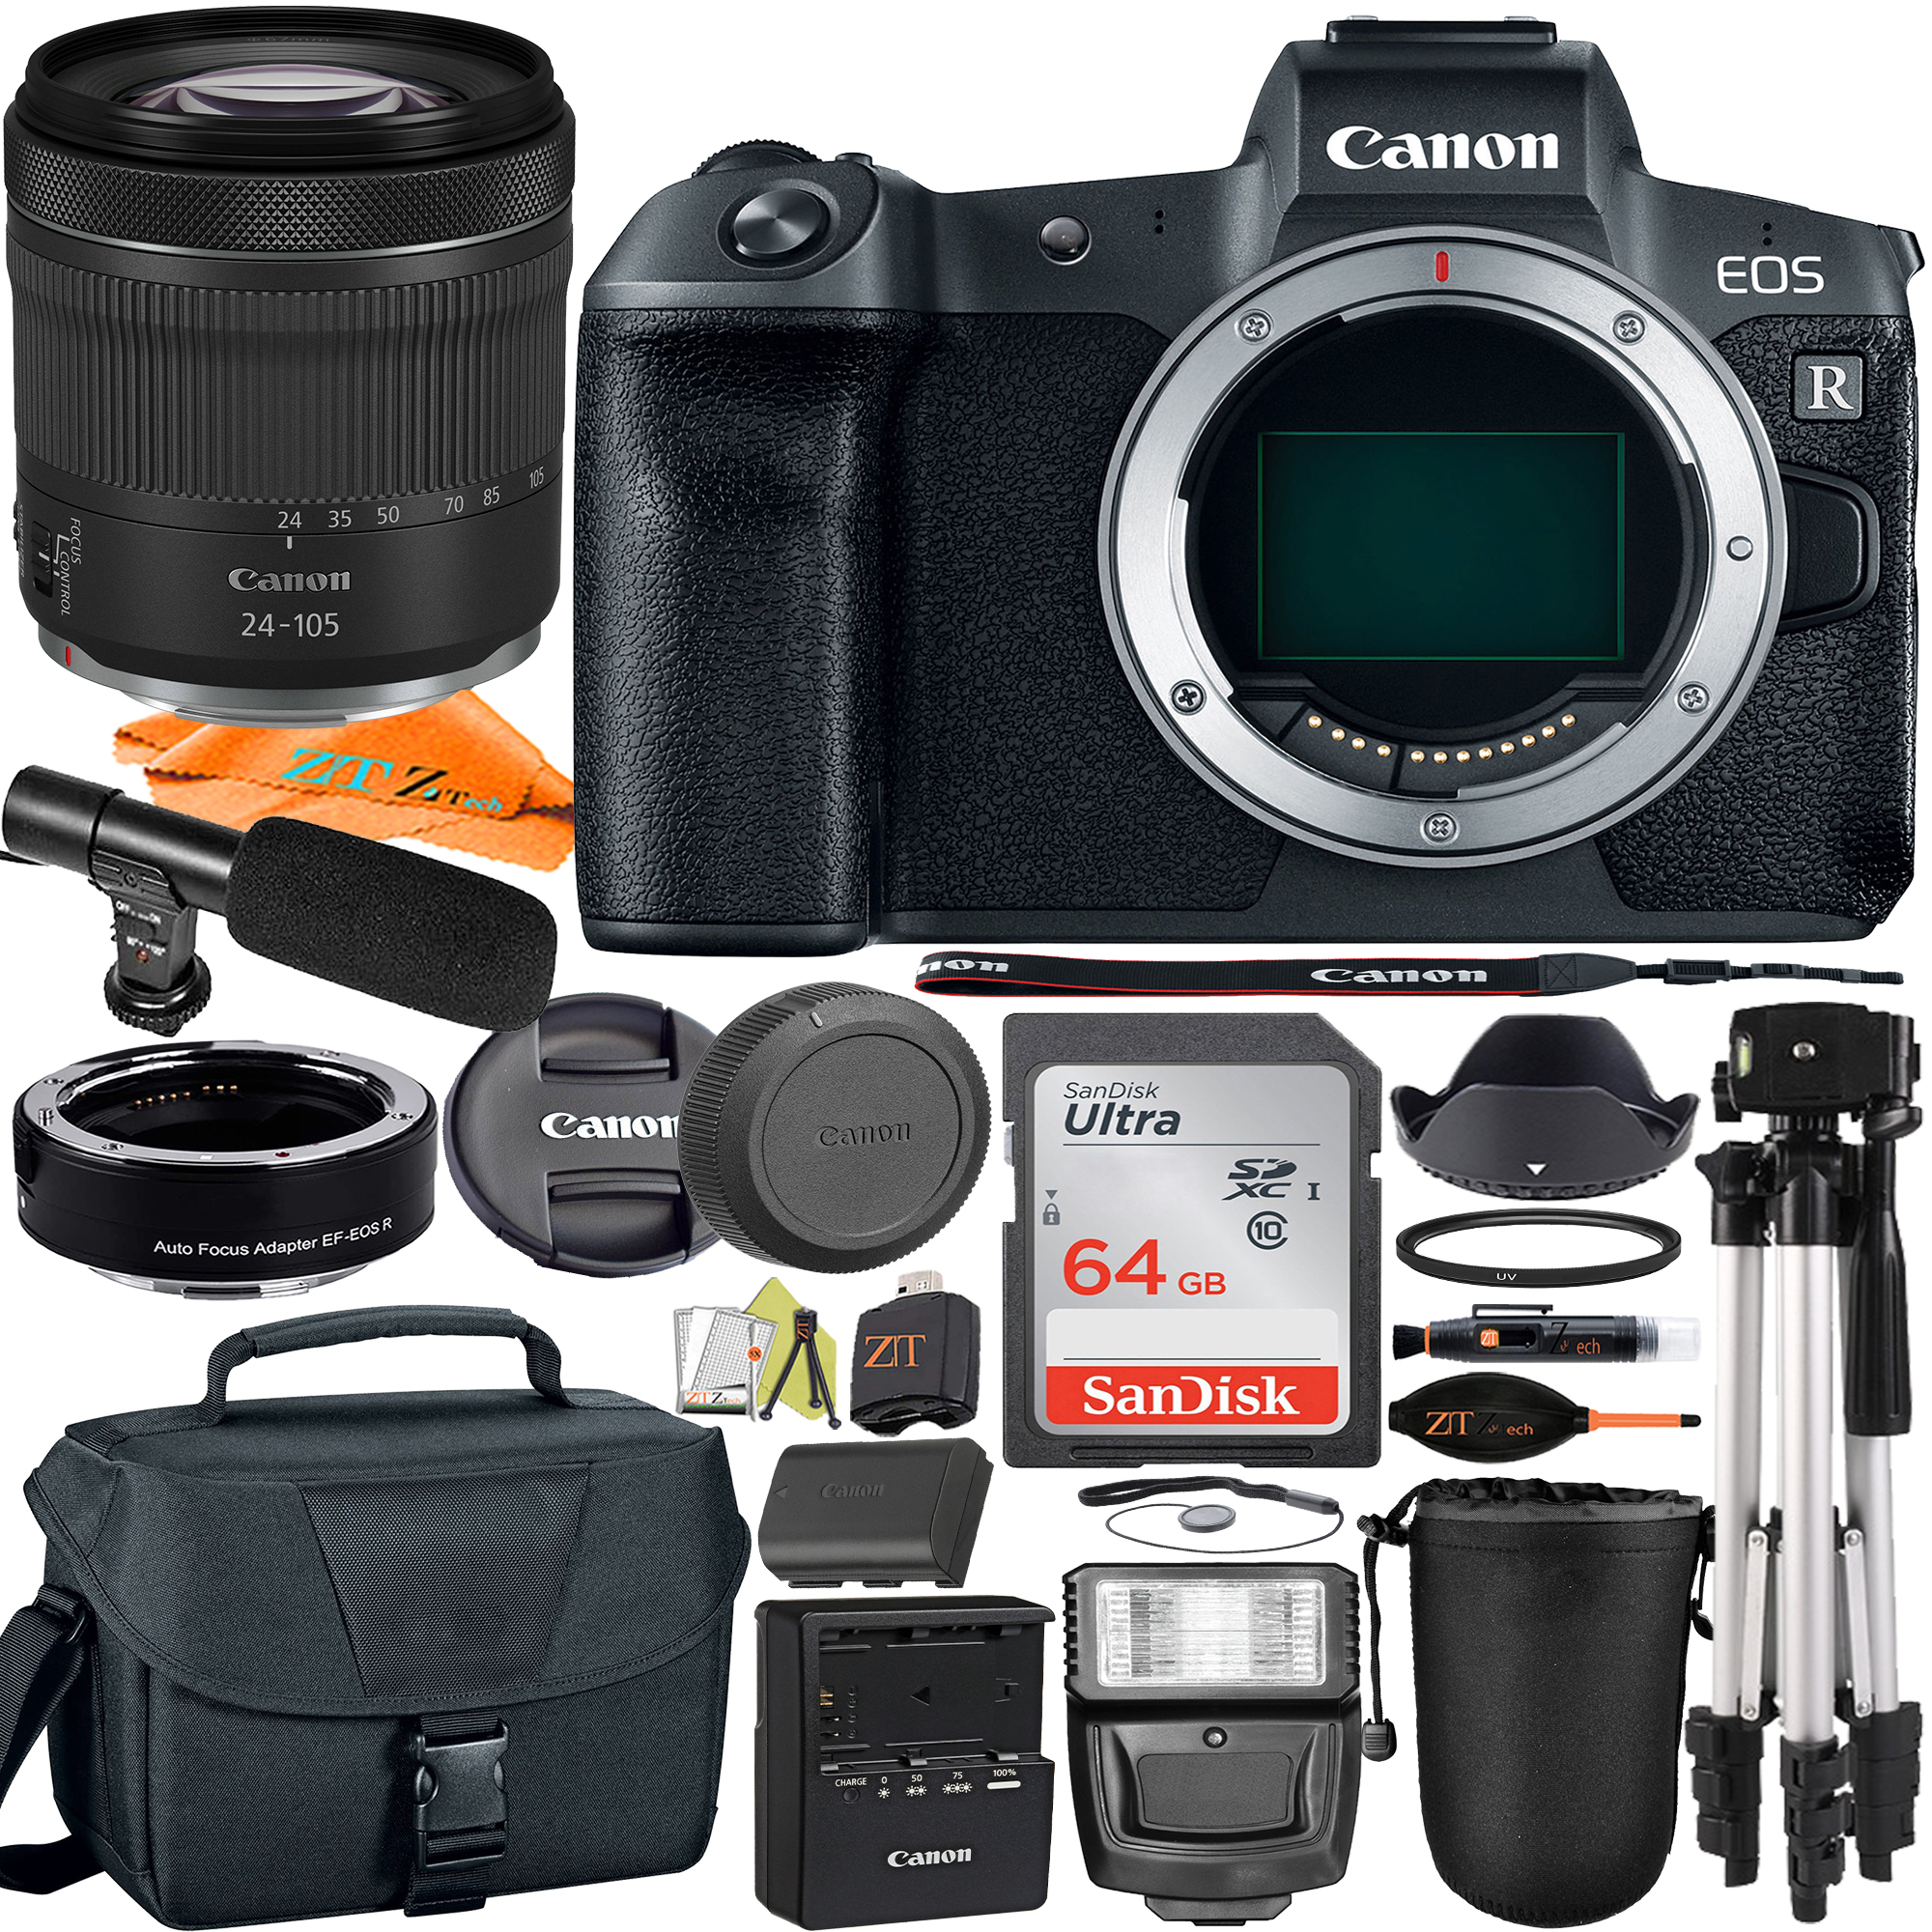 Canon EOS R Mirrorless Digital Camera with RF24-105mm Lens + Mount Adapter + SanDisk 64GB + Case + ZeeTech Accessory Bundle